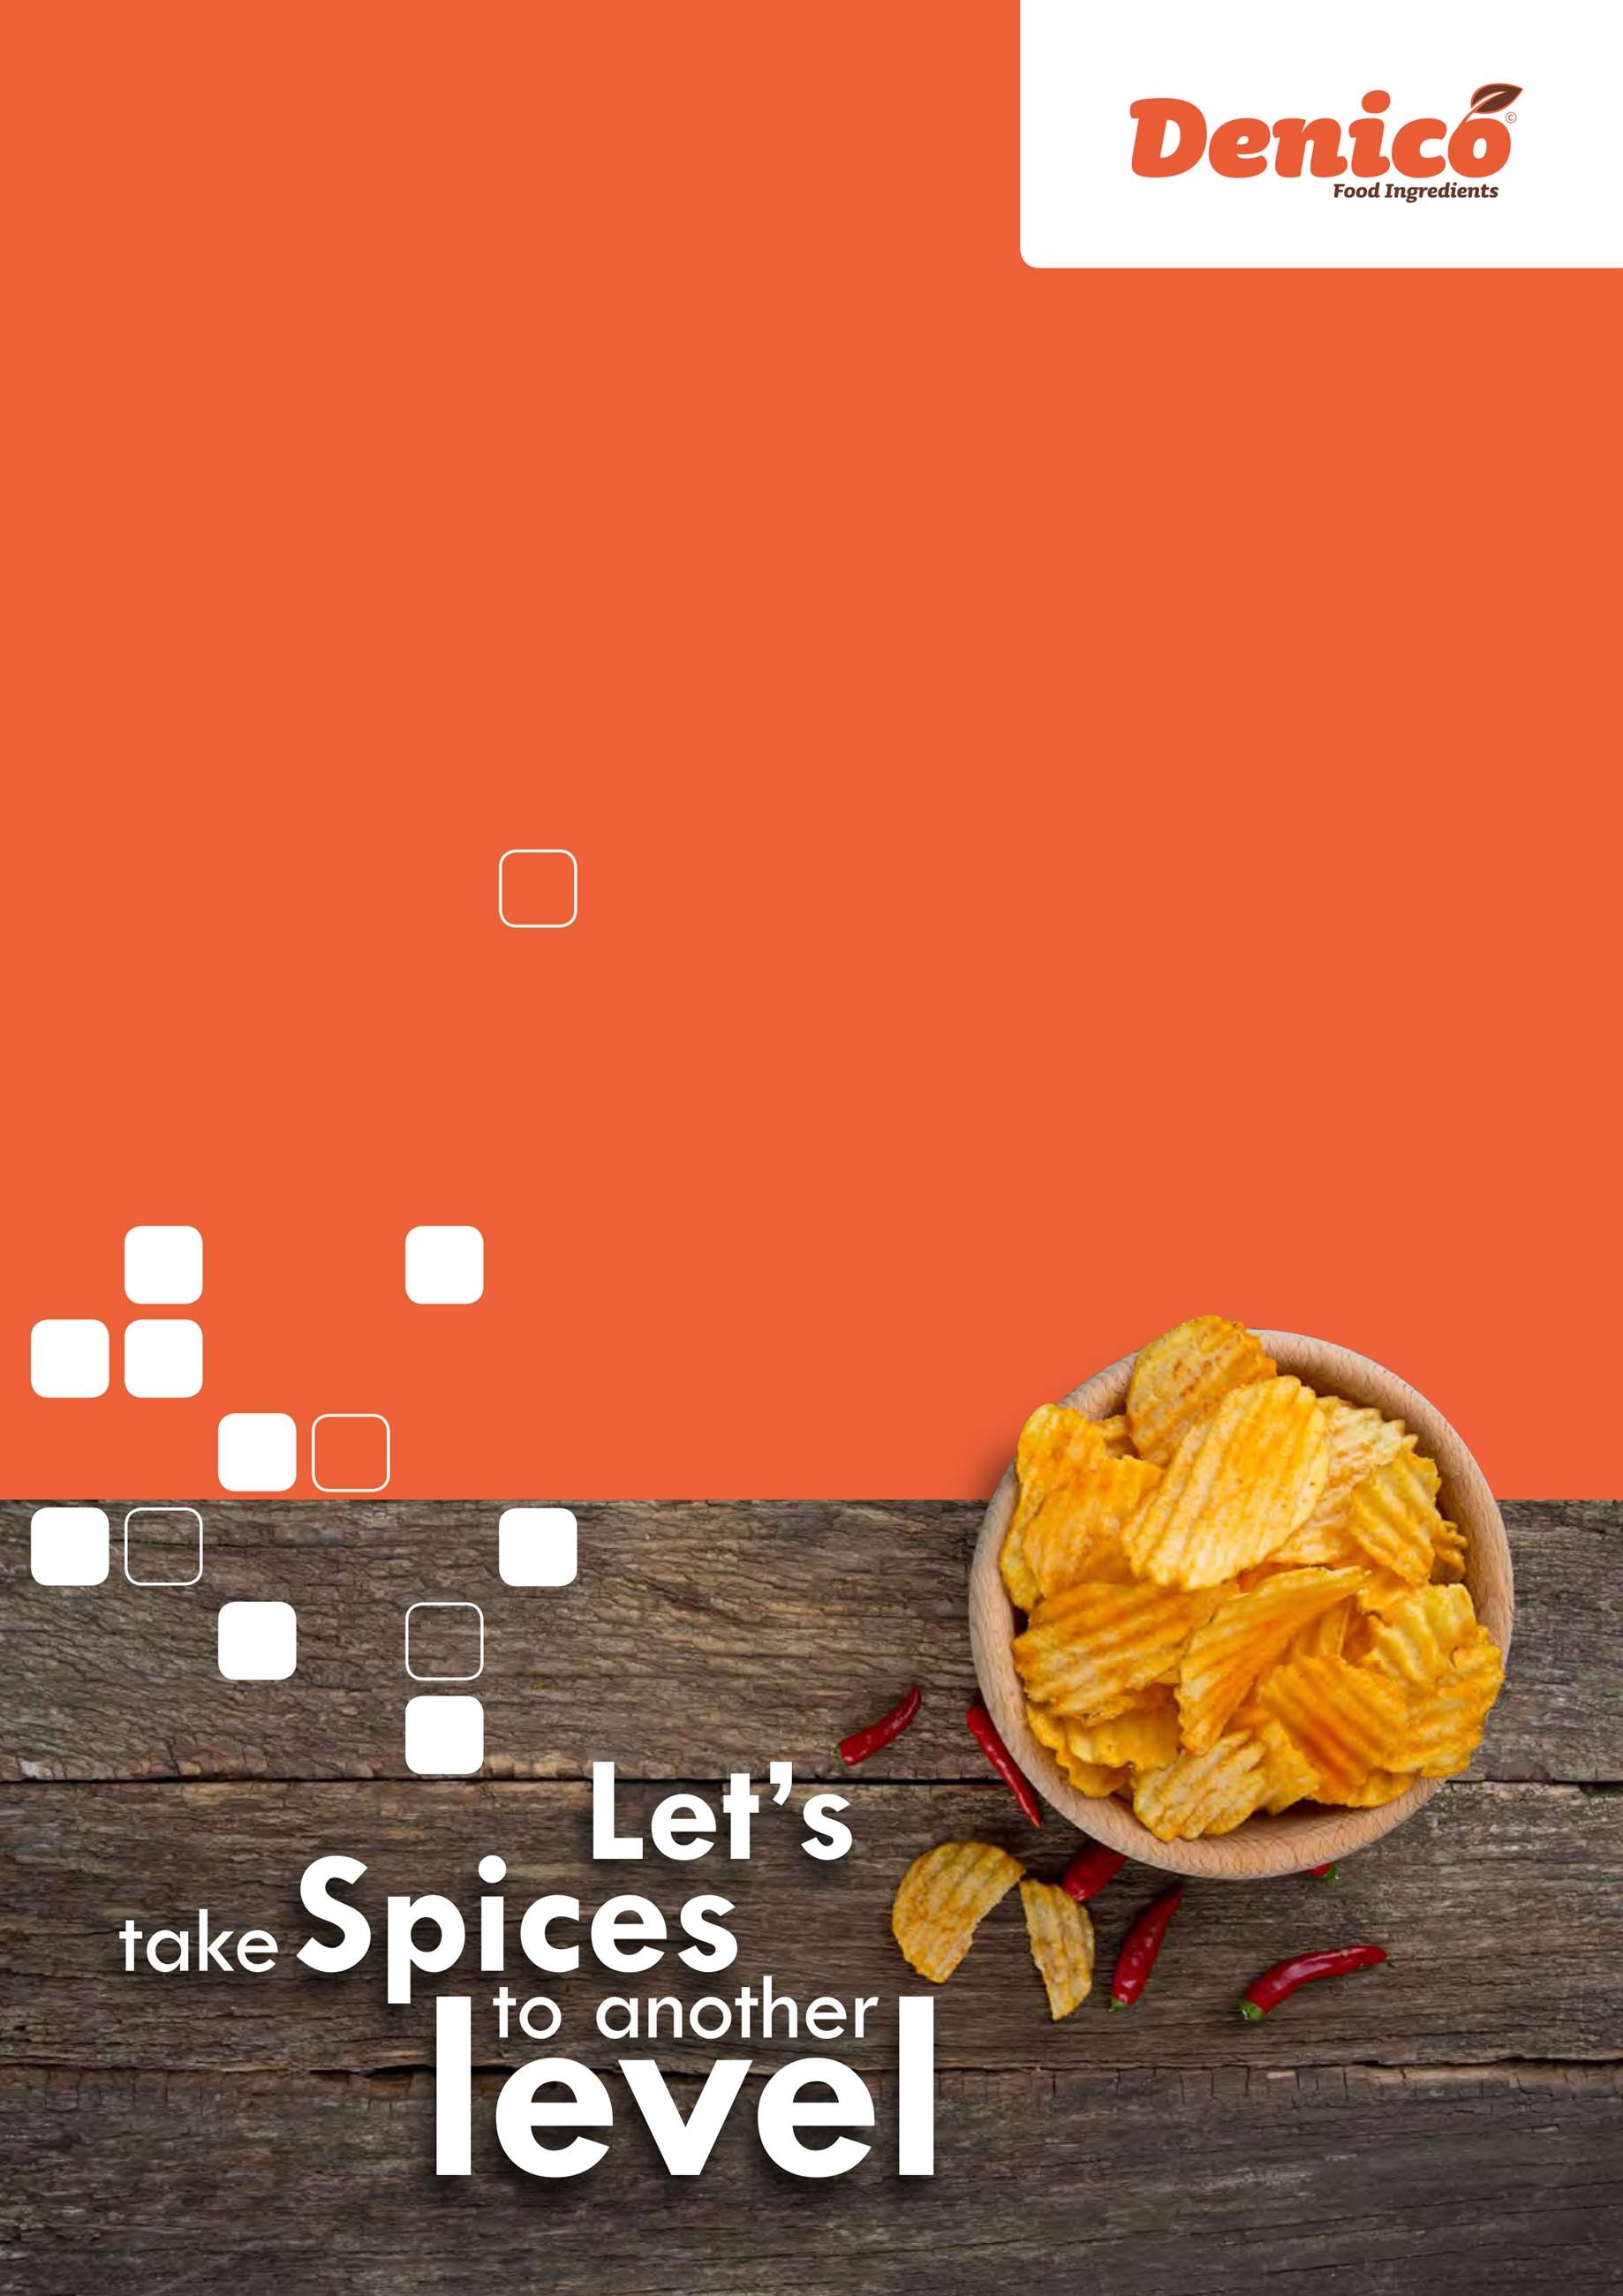 denico-spices-for-chips-and-snacks-a4-en2_web-1